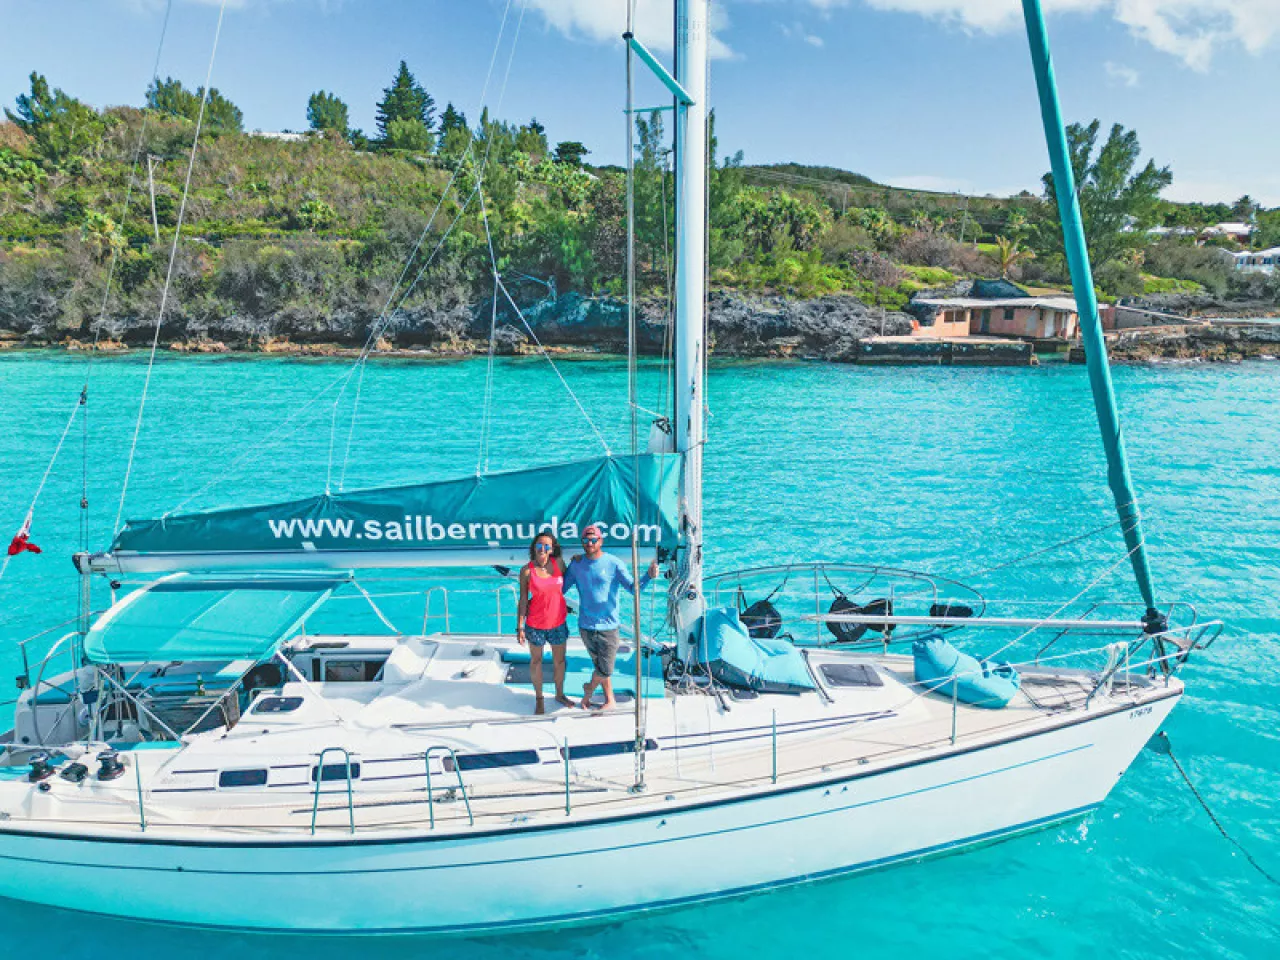 Luxury Bermuda-Based Charter Sailing Company Announces Exciting New Partnership and the Addition of Freediving, Scuba Diving,